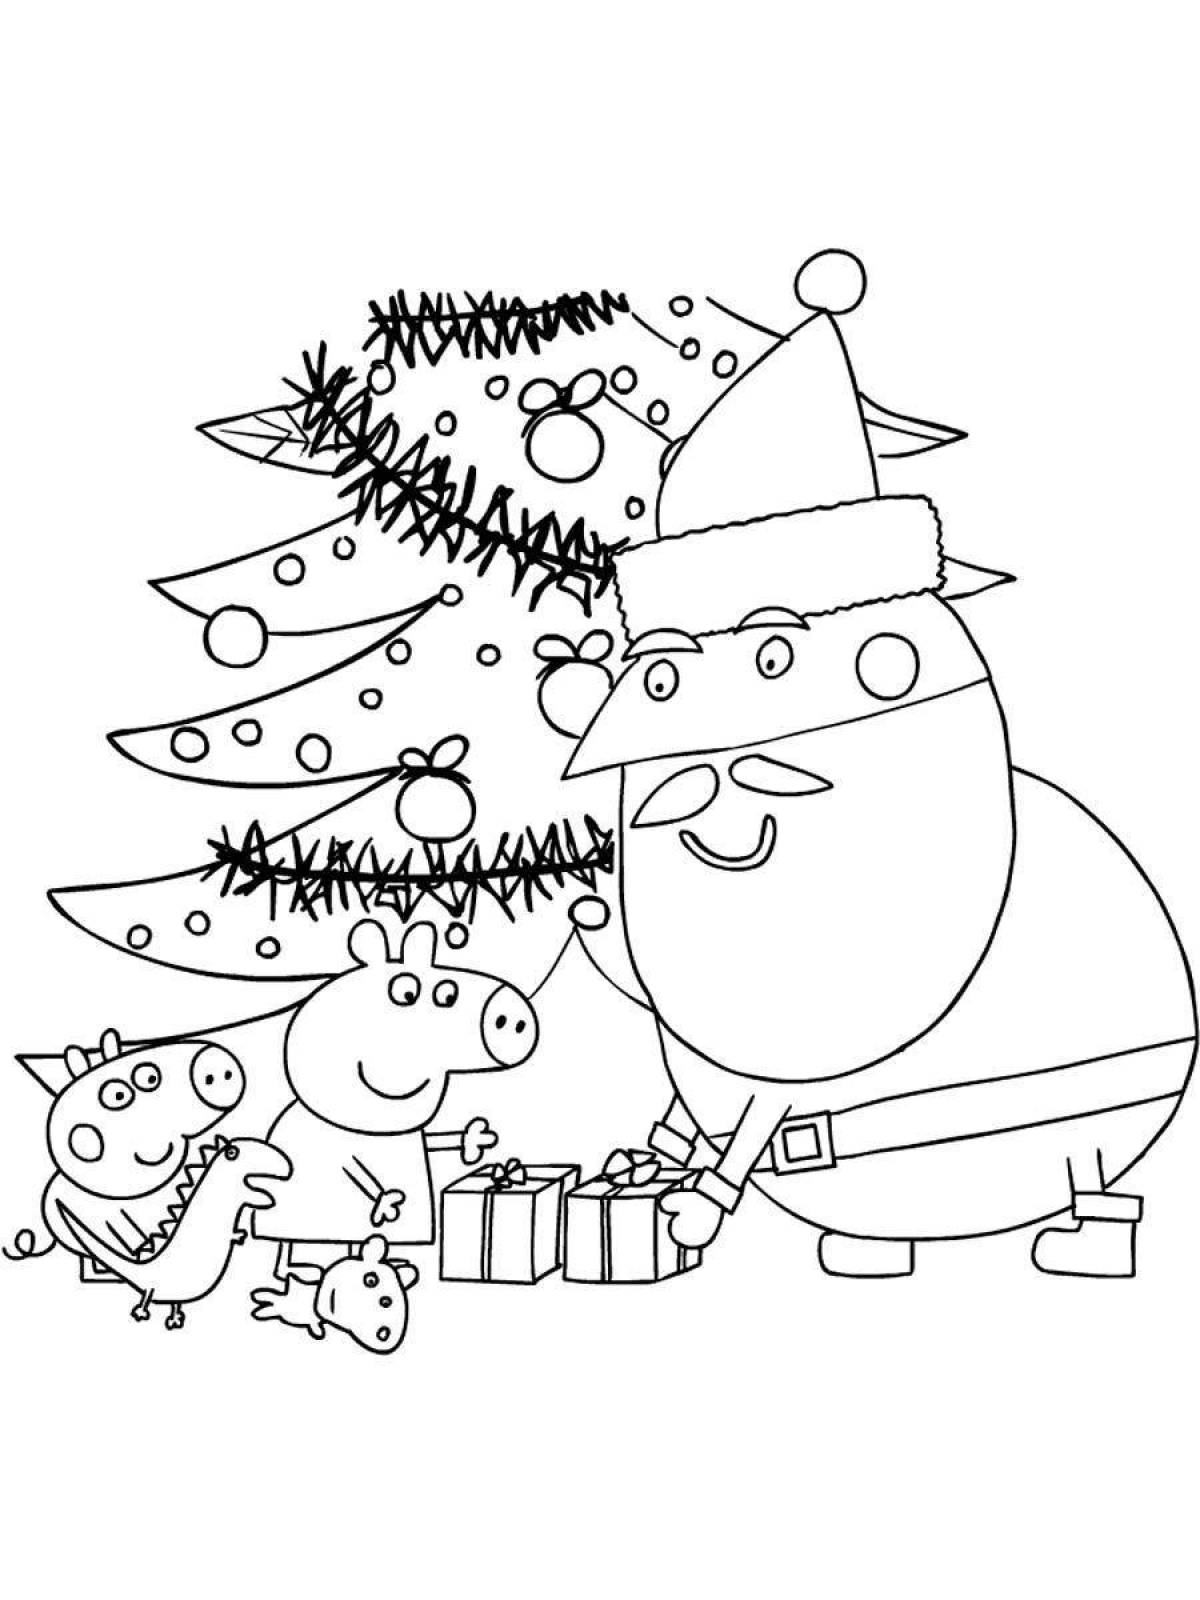 Colorful peppa pig christmas coloring book